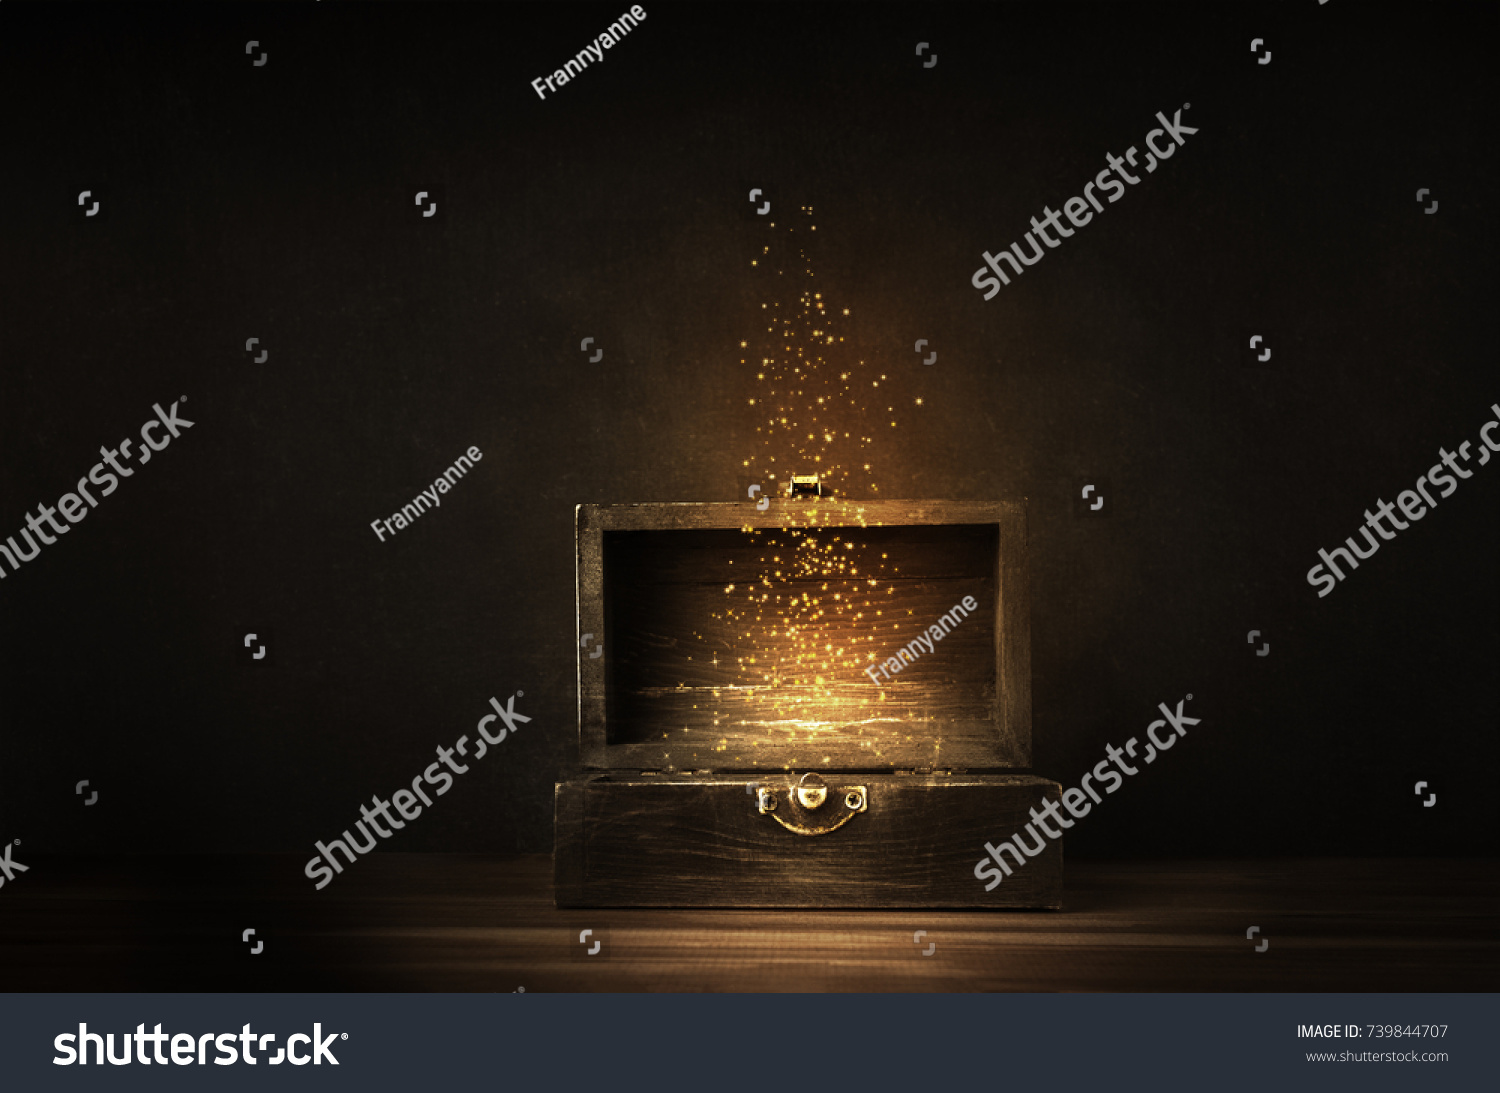 Glowing golden sparkles and stars rising from an old, opened wooden treasure chest. Darkly lit on a planked surface with black chalkboard background. #739844707